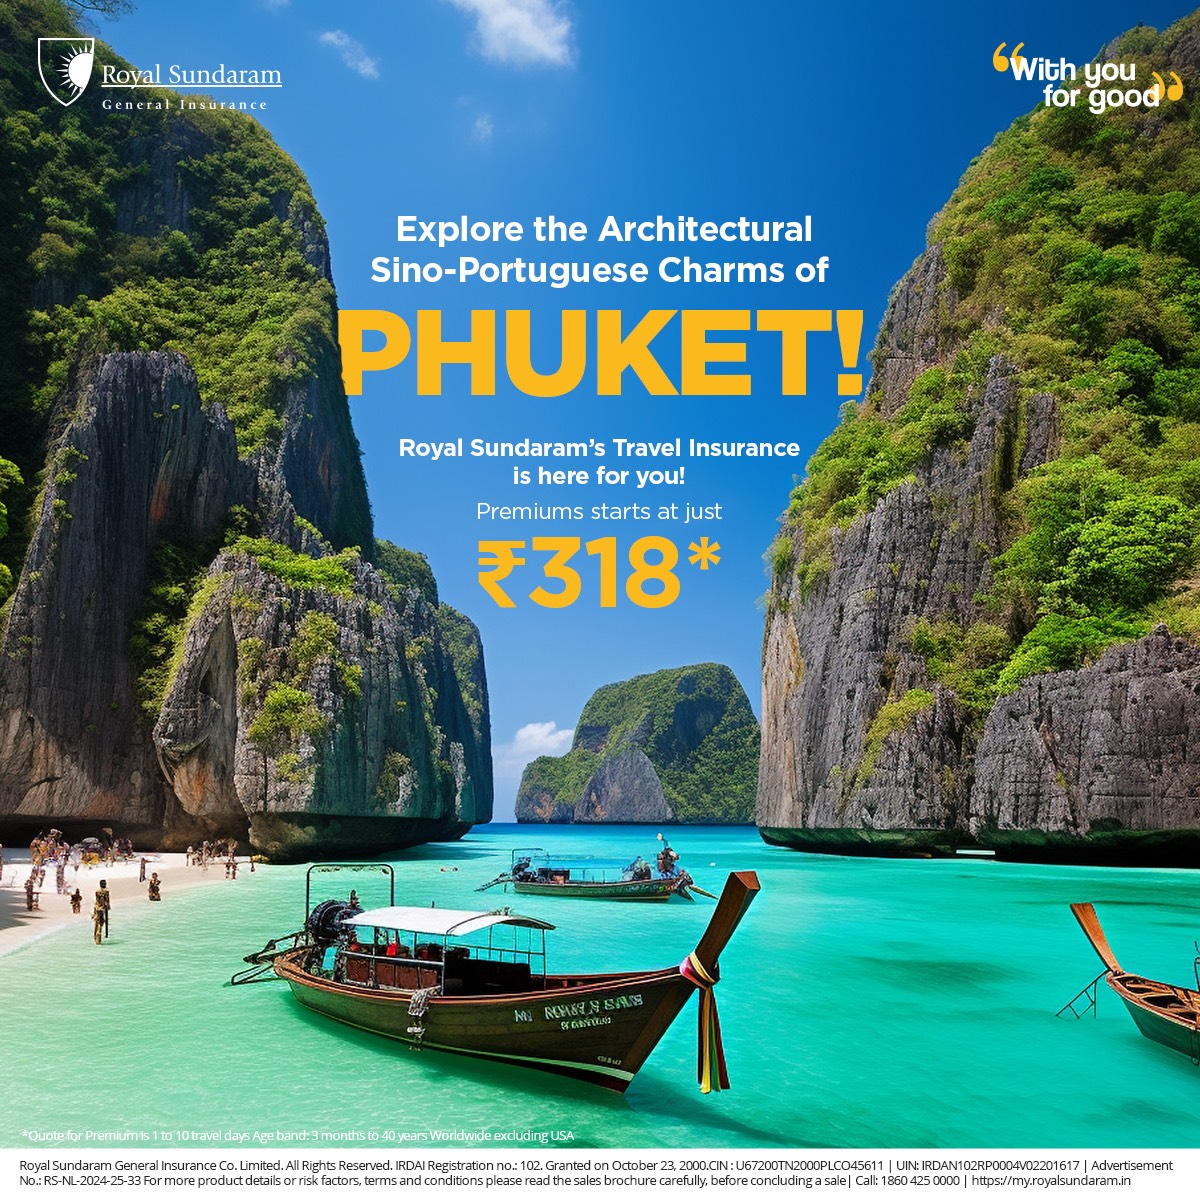 From cosy cafes to busy markets and rows of colourful shophouses, Phuket's architecture is a must-see! Embark on a stressfree Thai holiday with Royal Sundaram Travel Insurance because you're covered every step of the way at just ₹318*.  #travelinsurance #withyouforgood